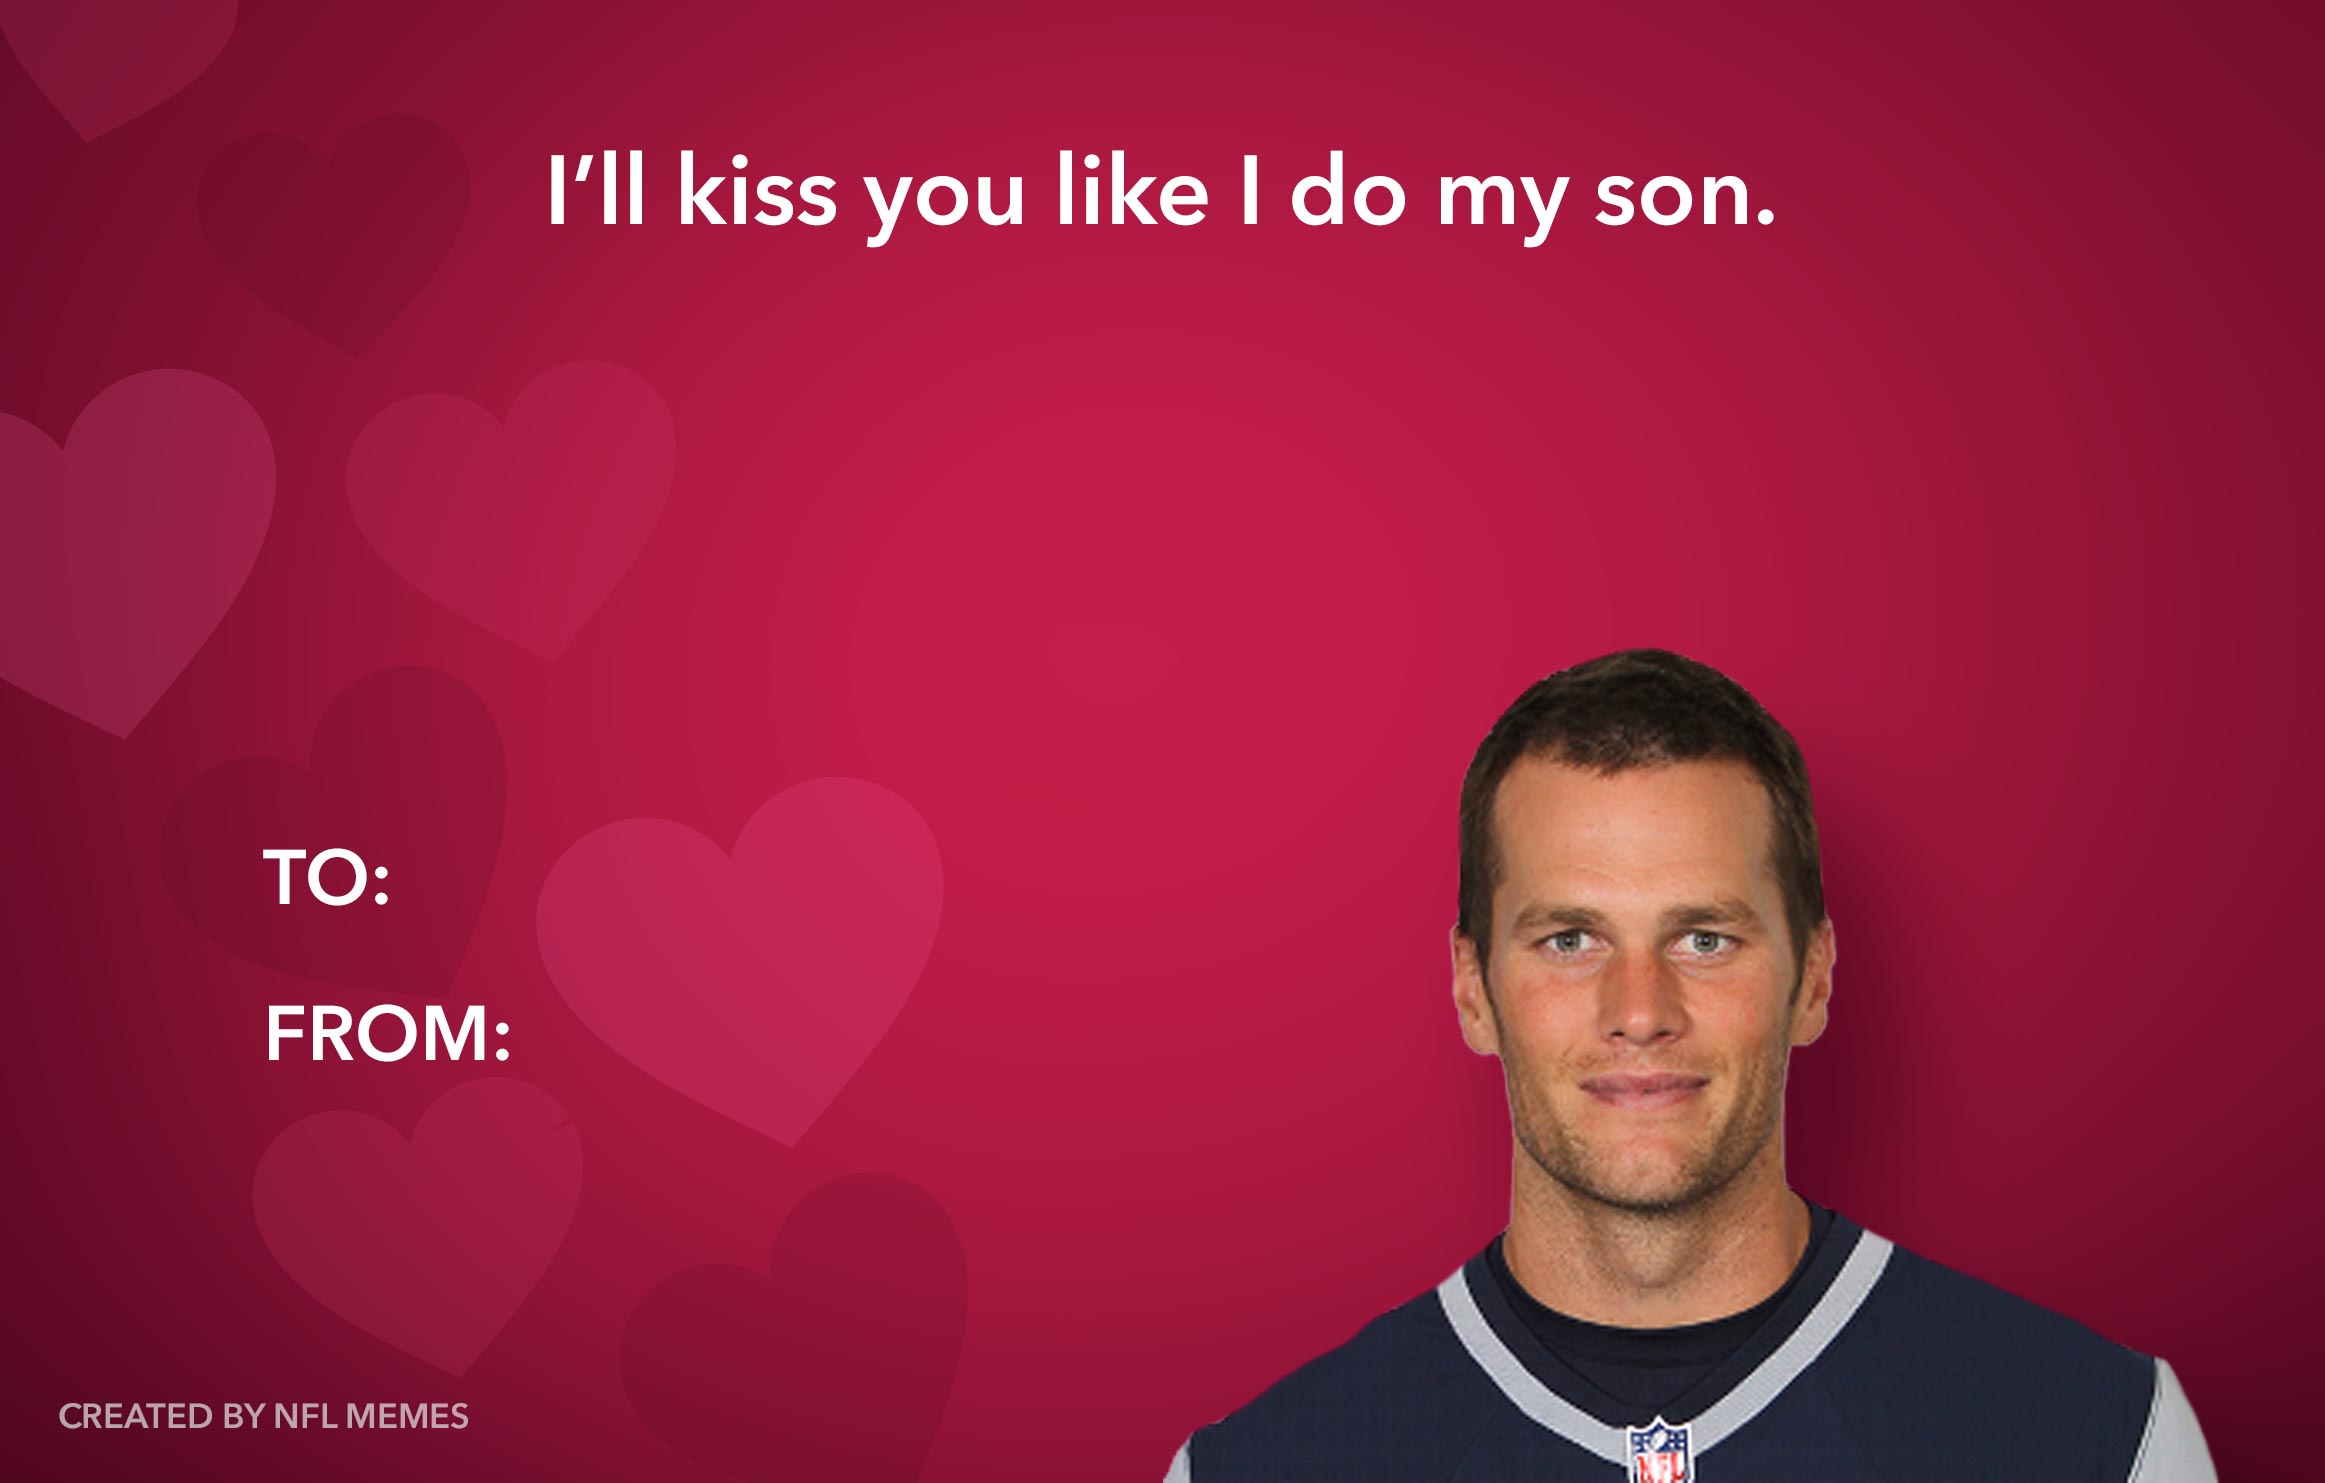 Here S This Year S Batch Of Hilarious Nfl Themed Valentine S Day Cards Pics